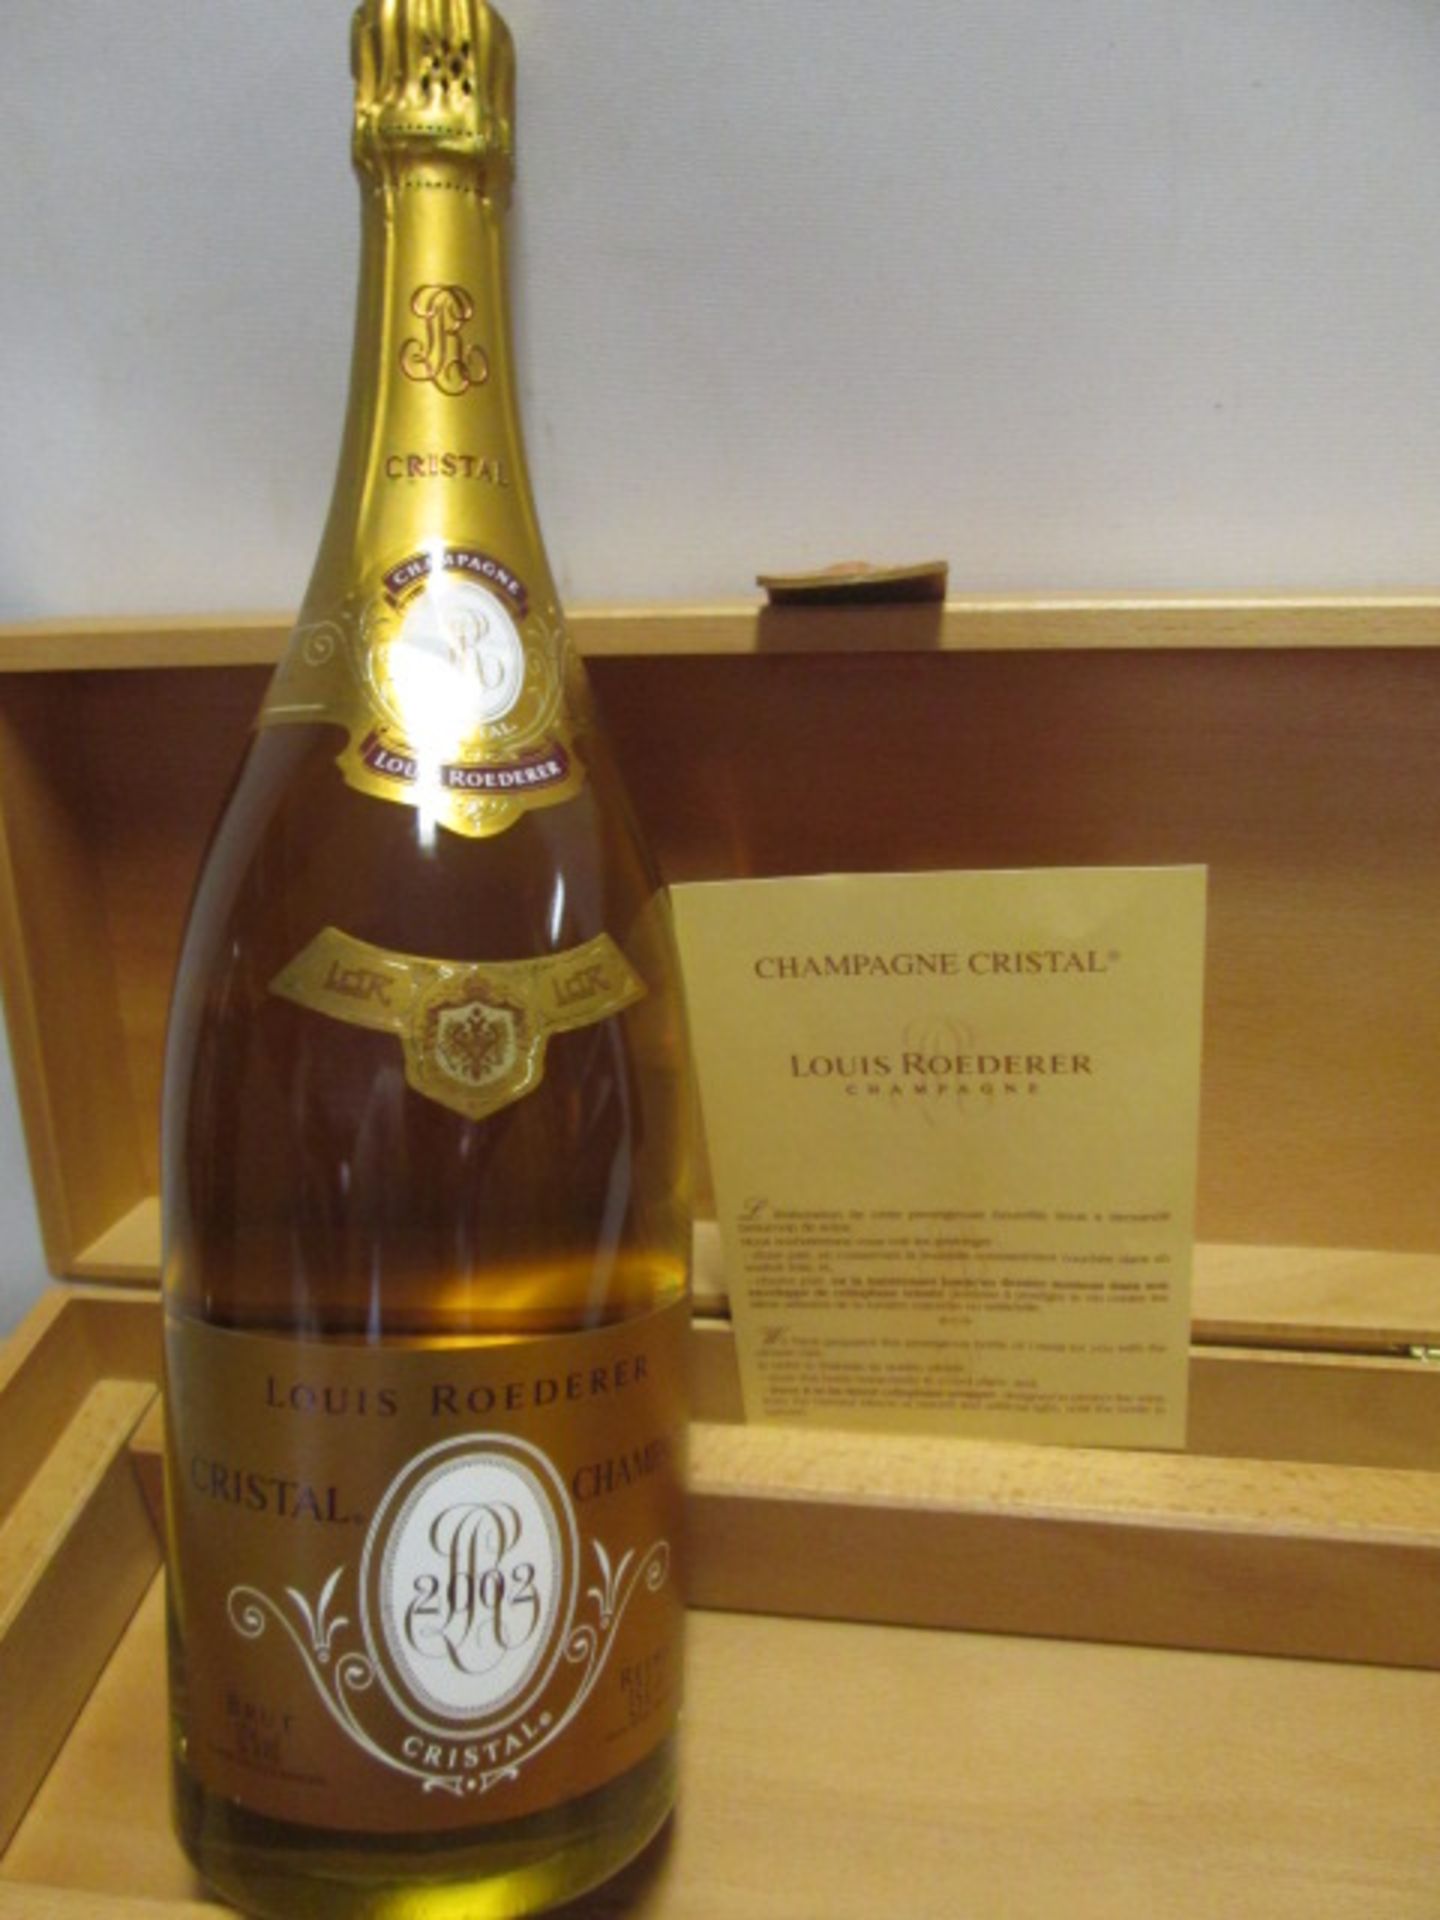 A Vintage 2002, Magnum of Cristal Marque Deposee, Louis Roederer Champagne in Wood Display Case - Image 3 of 5